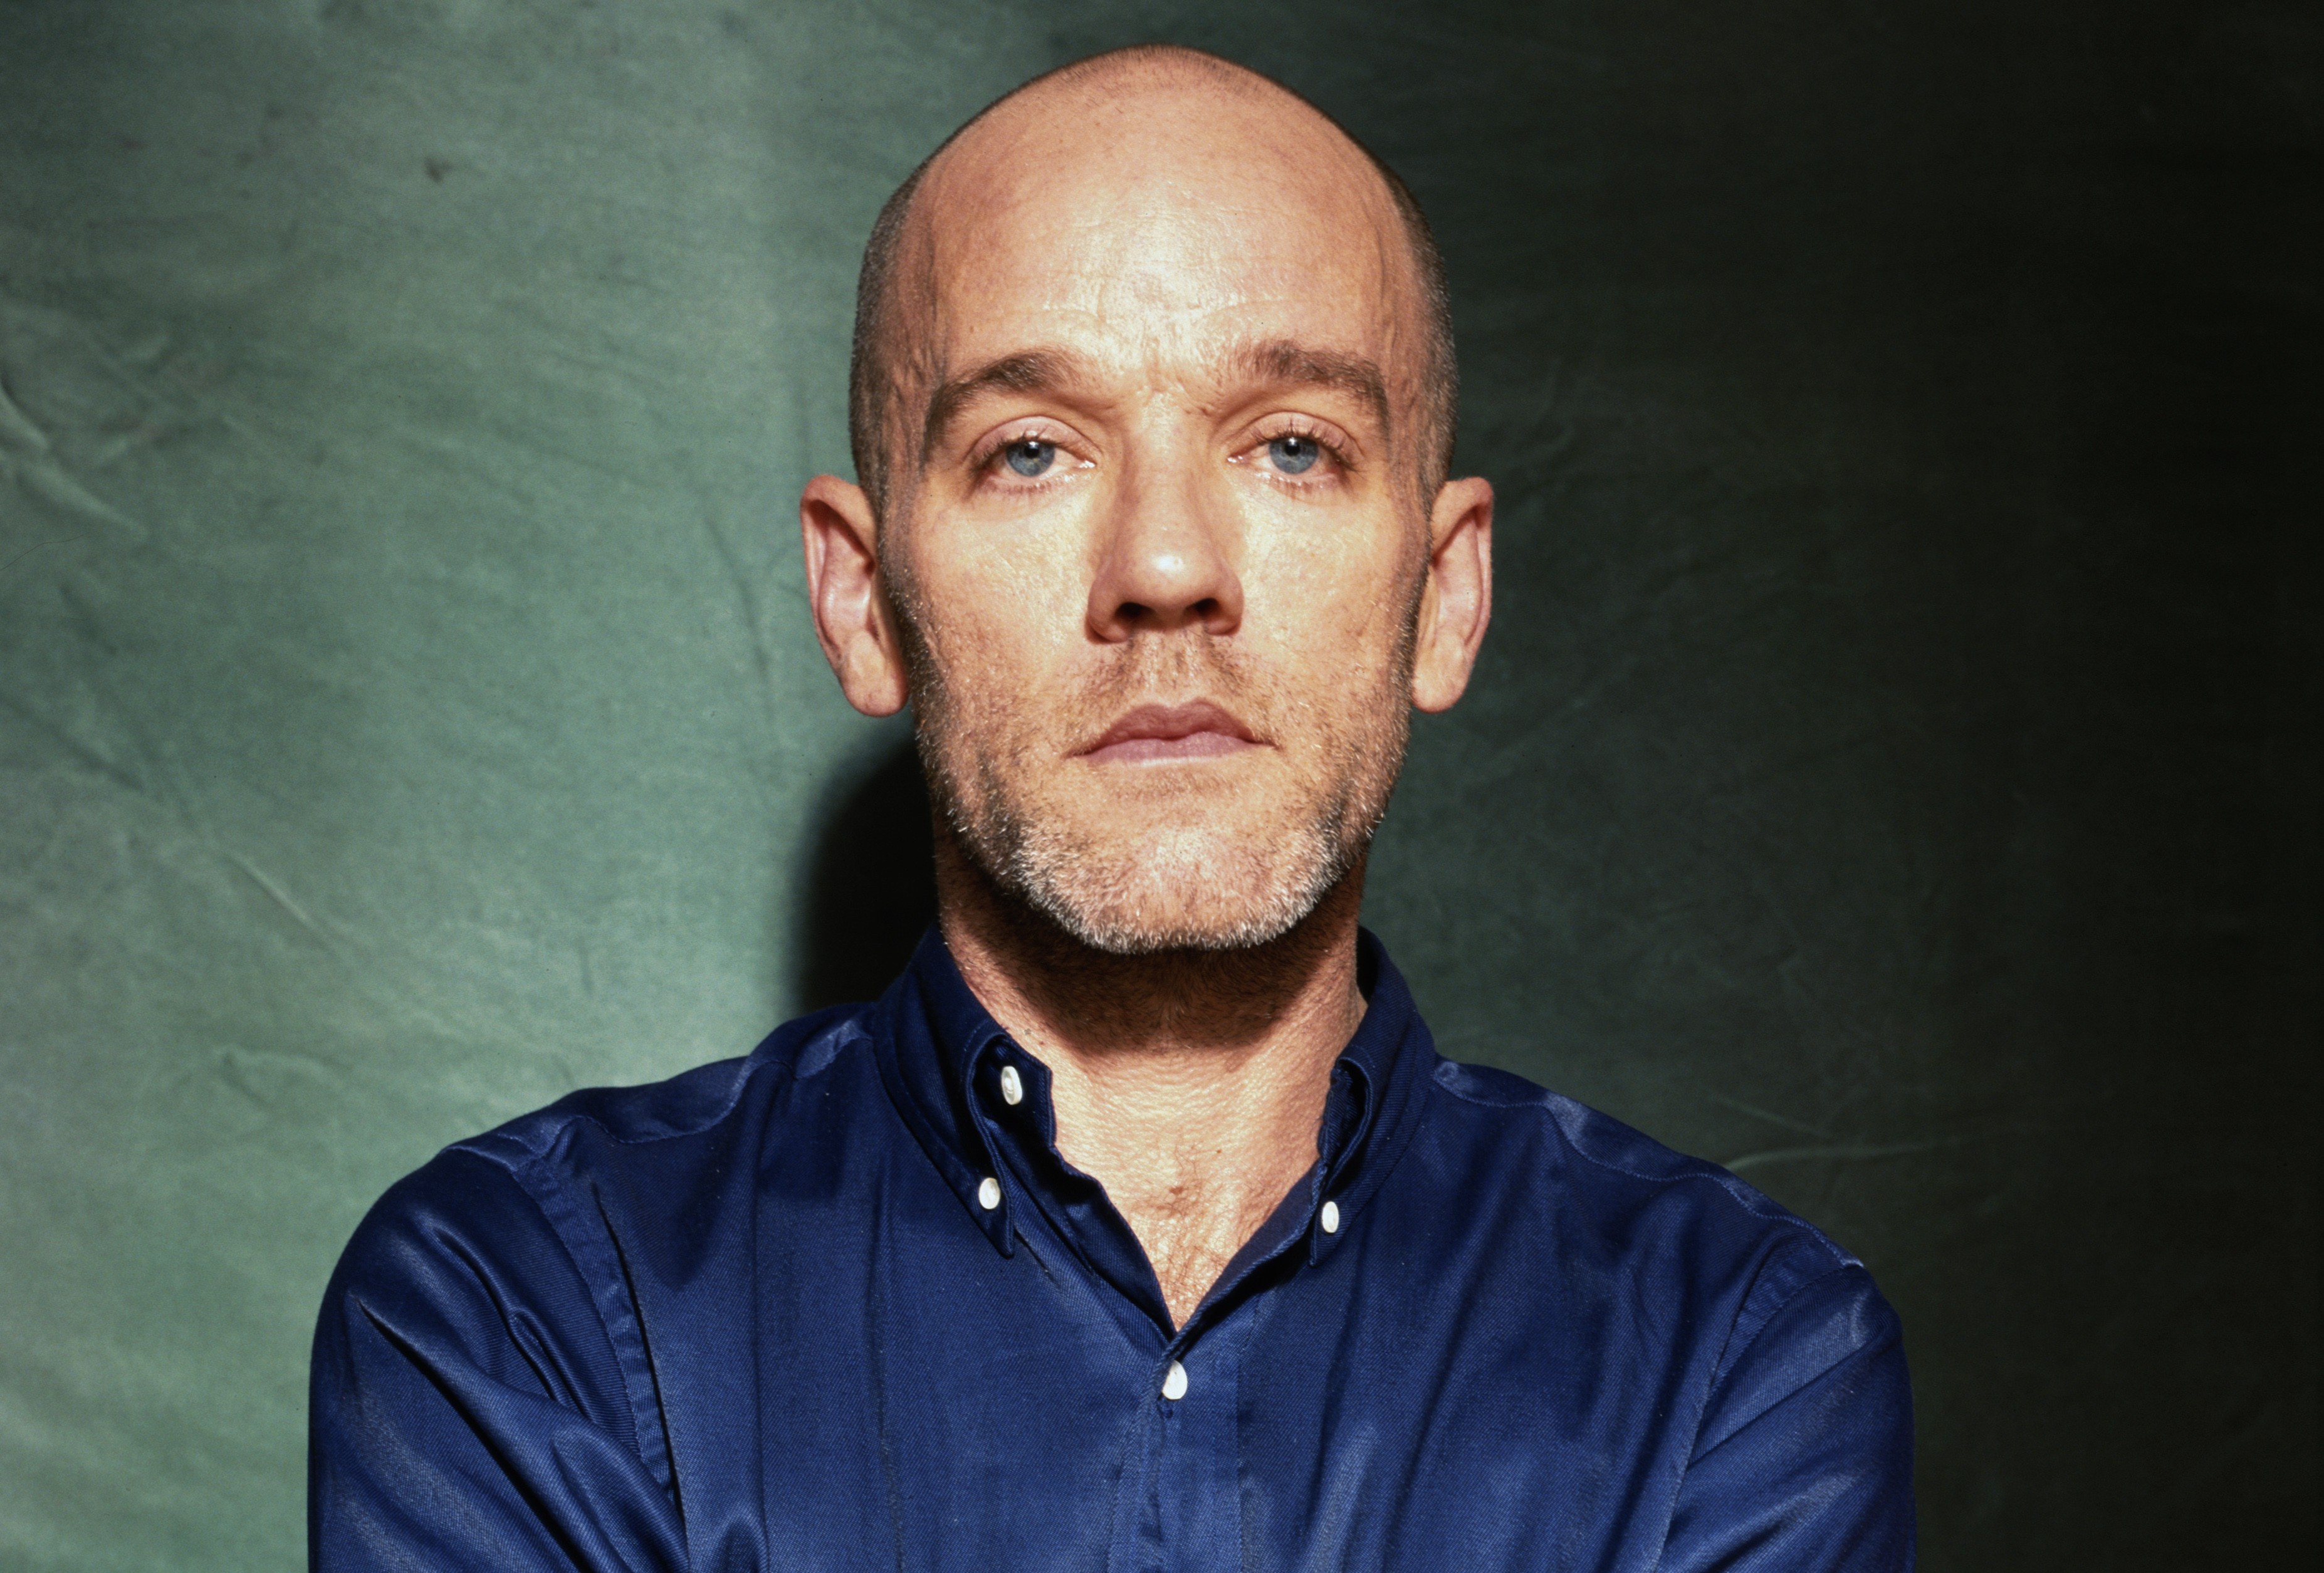 Hear a 10Second Teaser of New Solo Material from R.E.M. Frontman